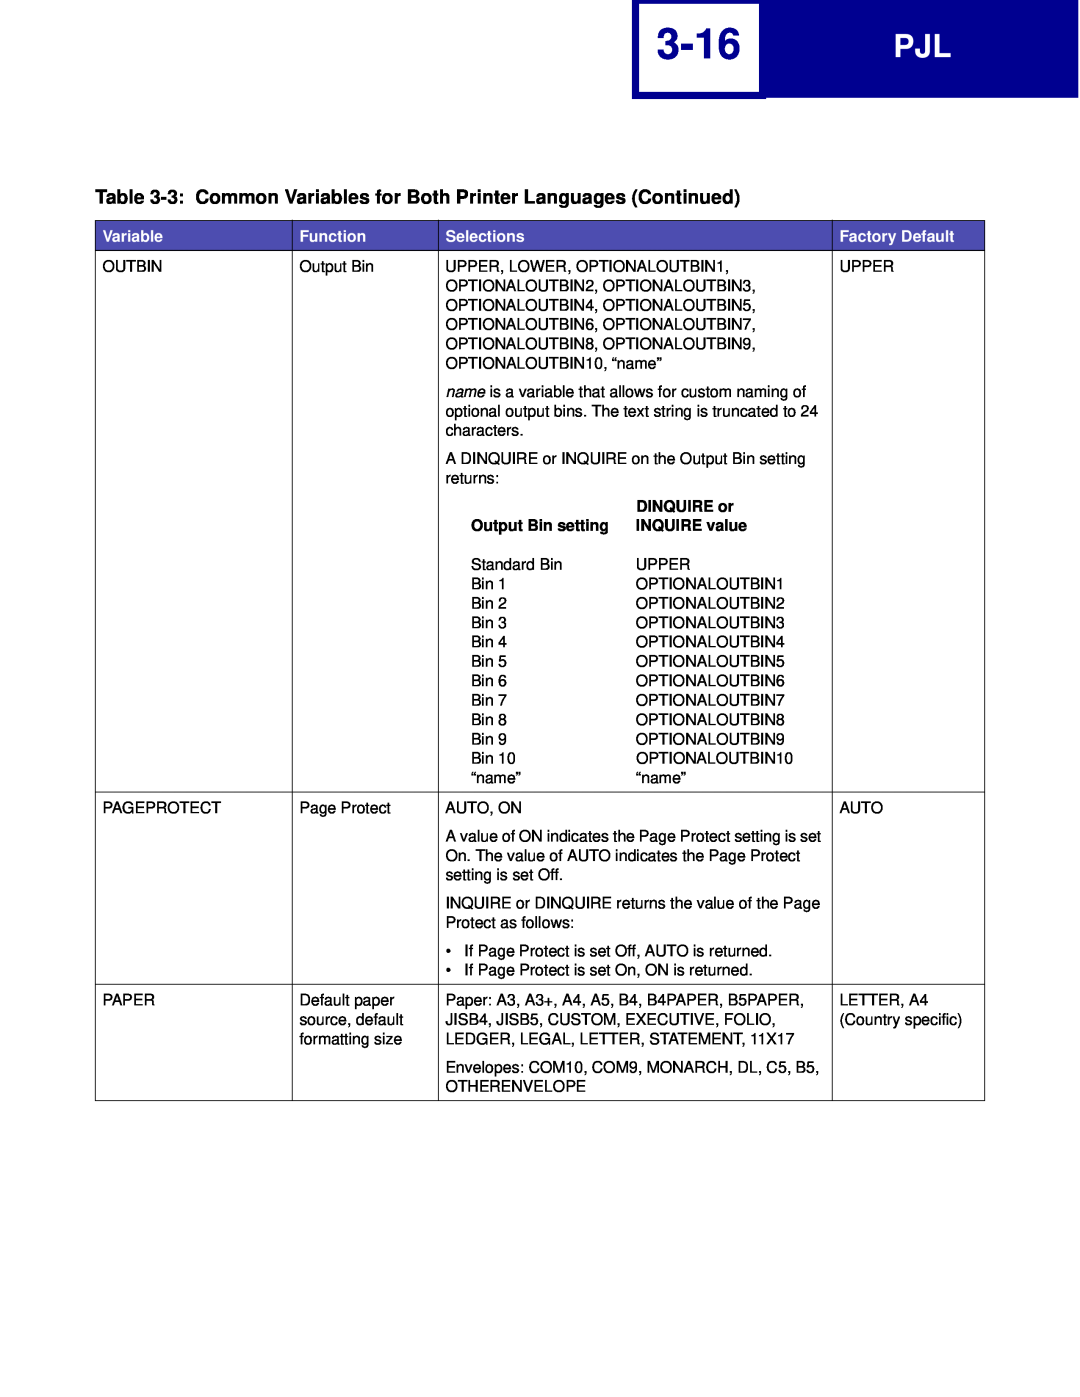 Lexmark C762 3-16, 3 Common Variables for Both Printer Languages Continued, DINQUIRE or, Output Bin setting, INQUIRE value 